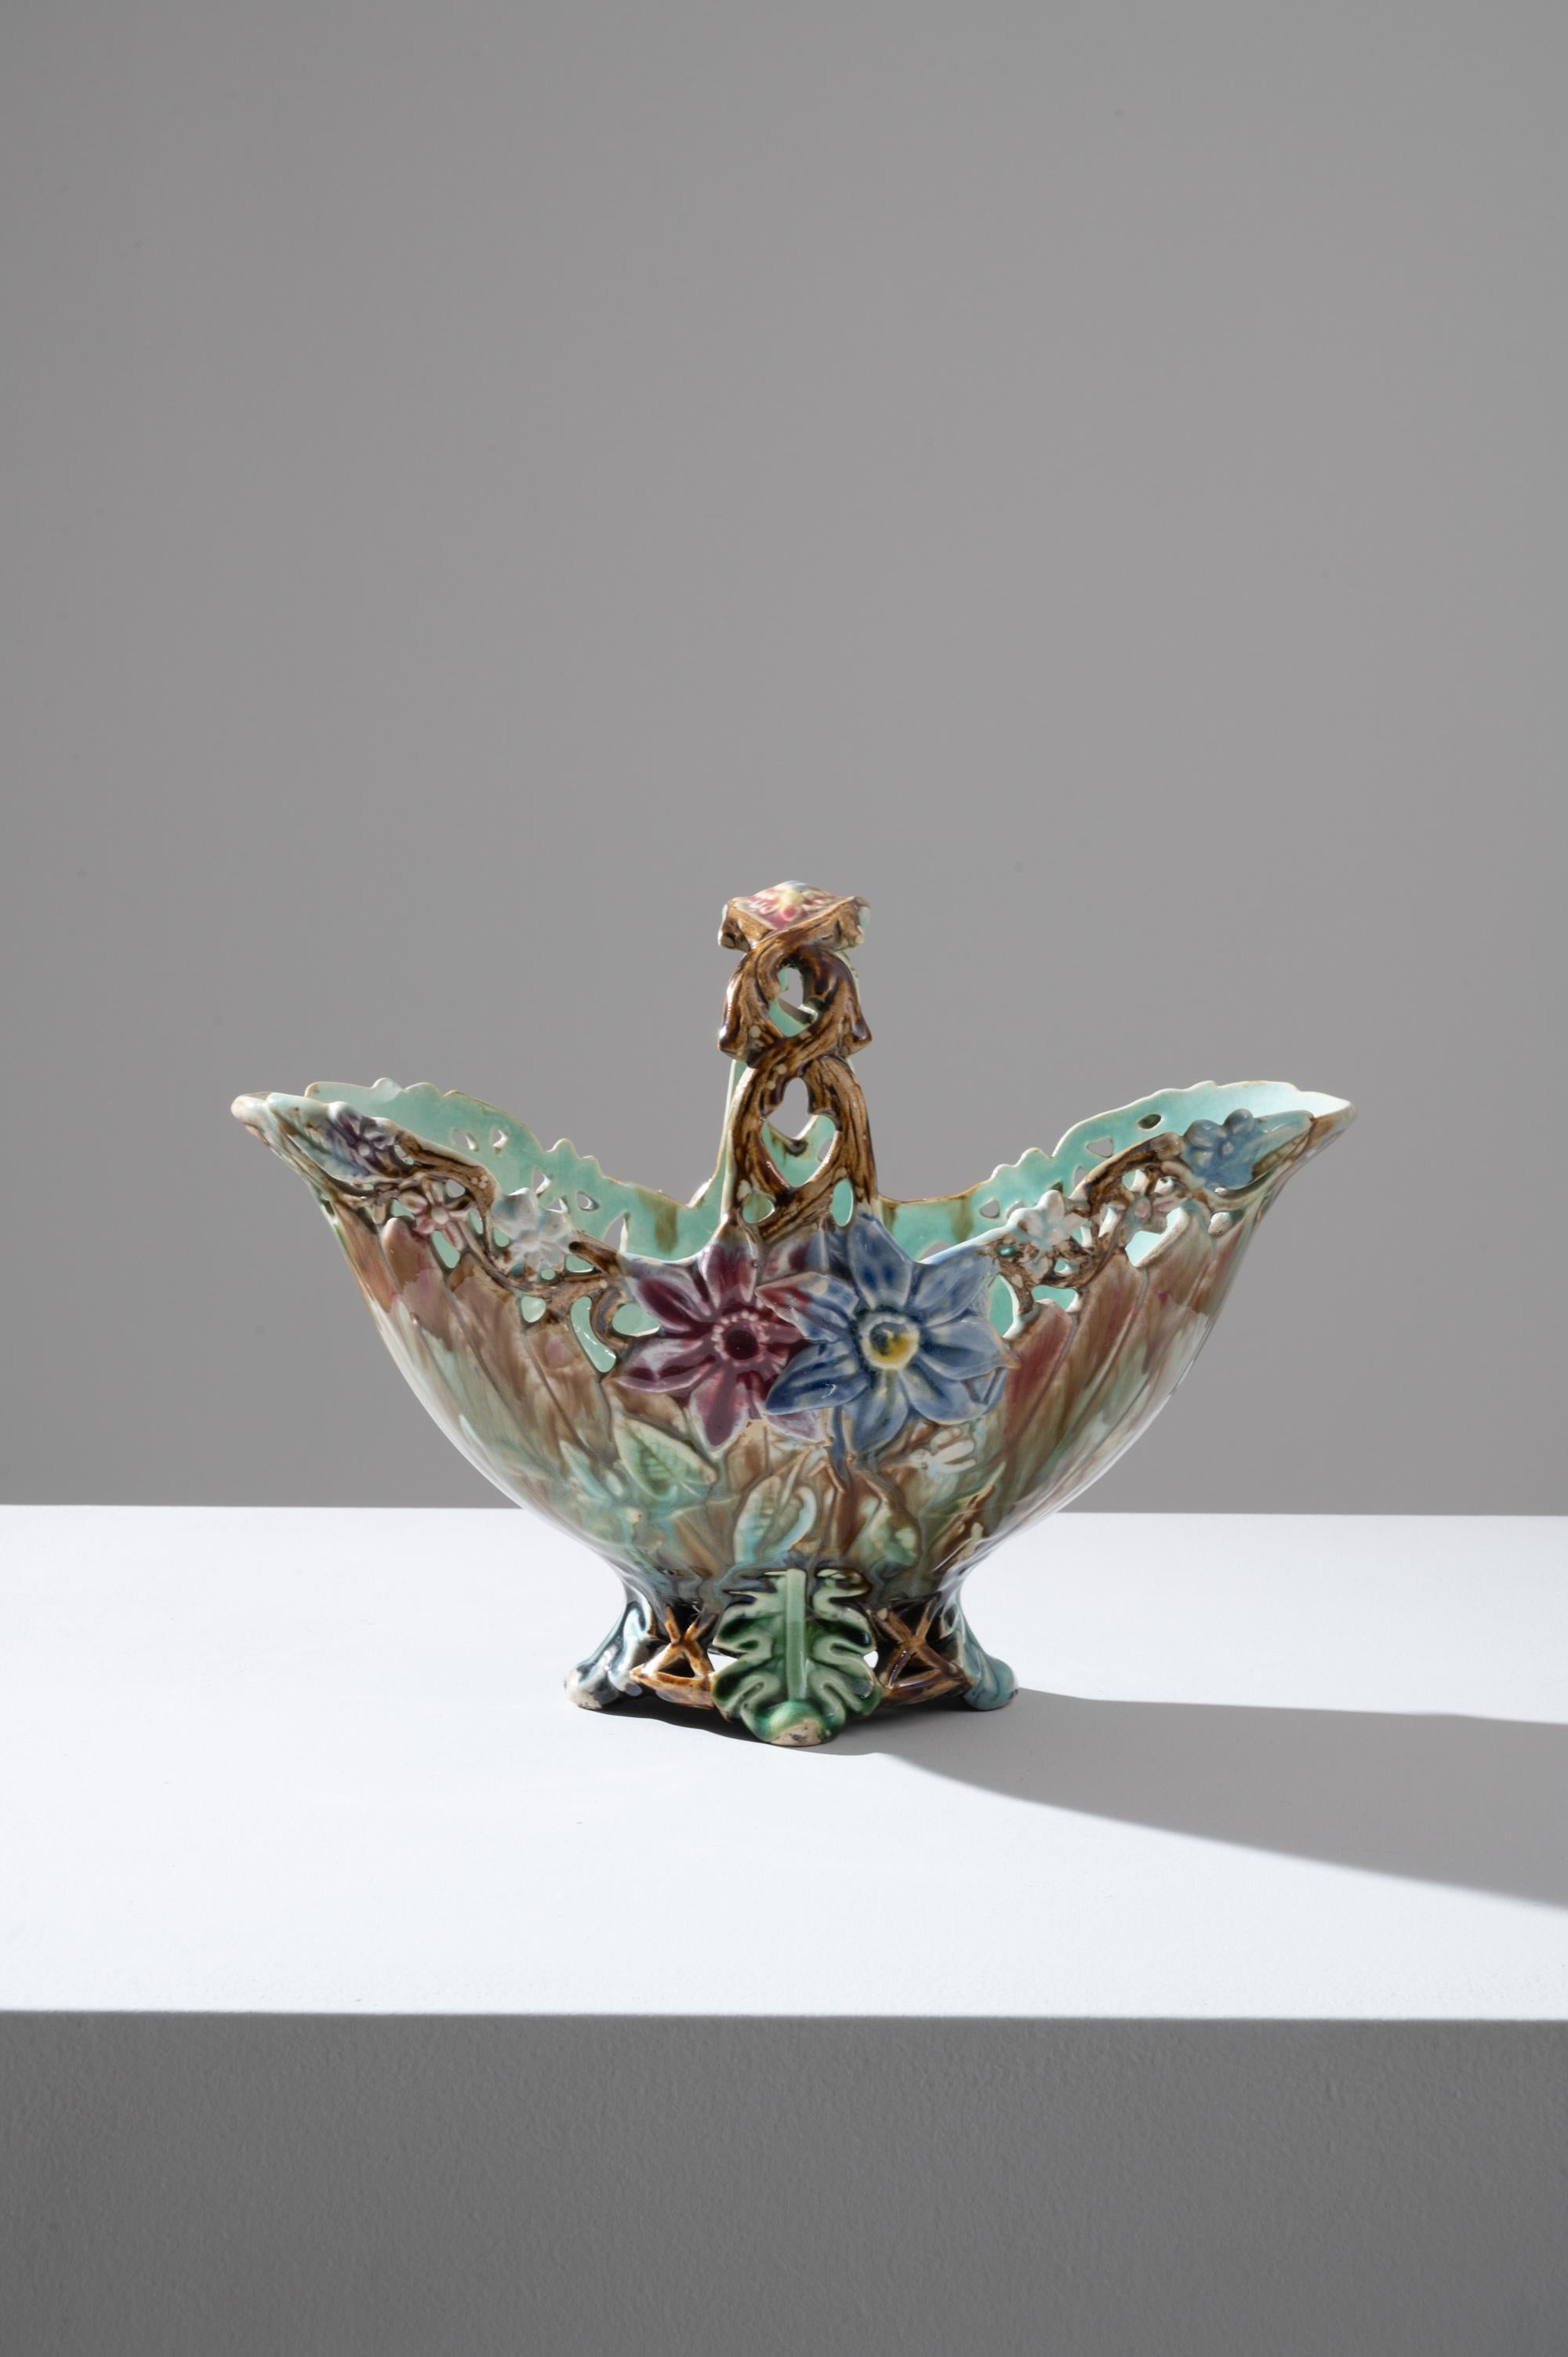 Delicate and whimsical, this vintage decorative ceramic bowl offers a woodland fantasy. Made in Belgium in the 1920s, the piece is shaped like a basket: but a basket composed of leaves, twigs and flowers, as if the plants of the forest had